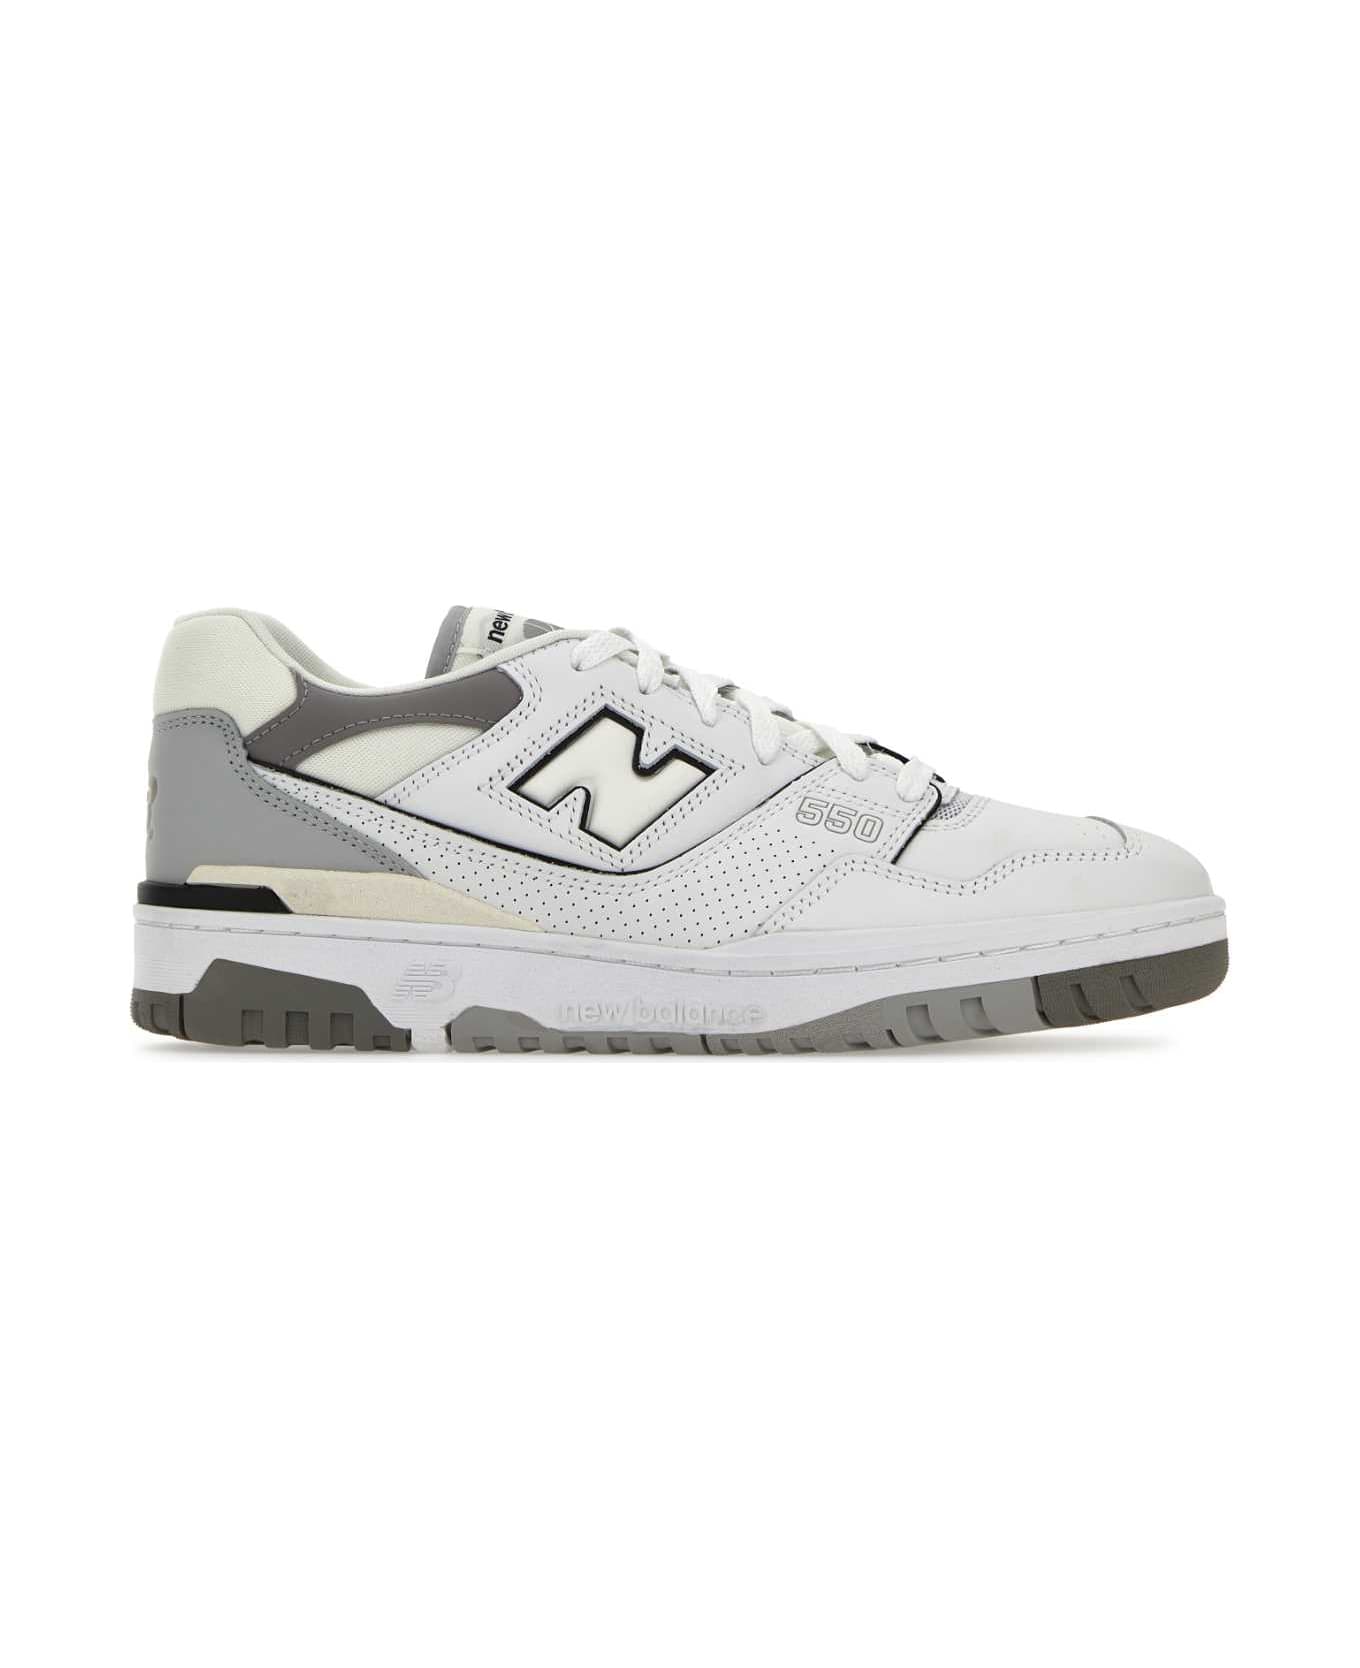 New Balance Two-tone Leather 550 Sneakers - WHITEGREY